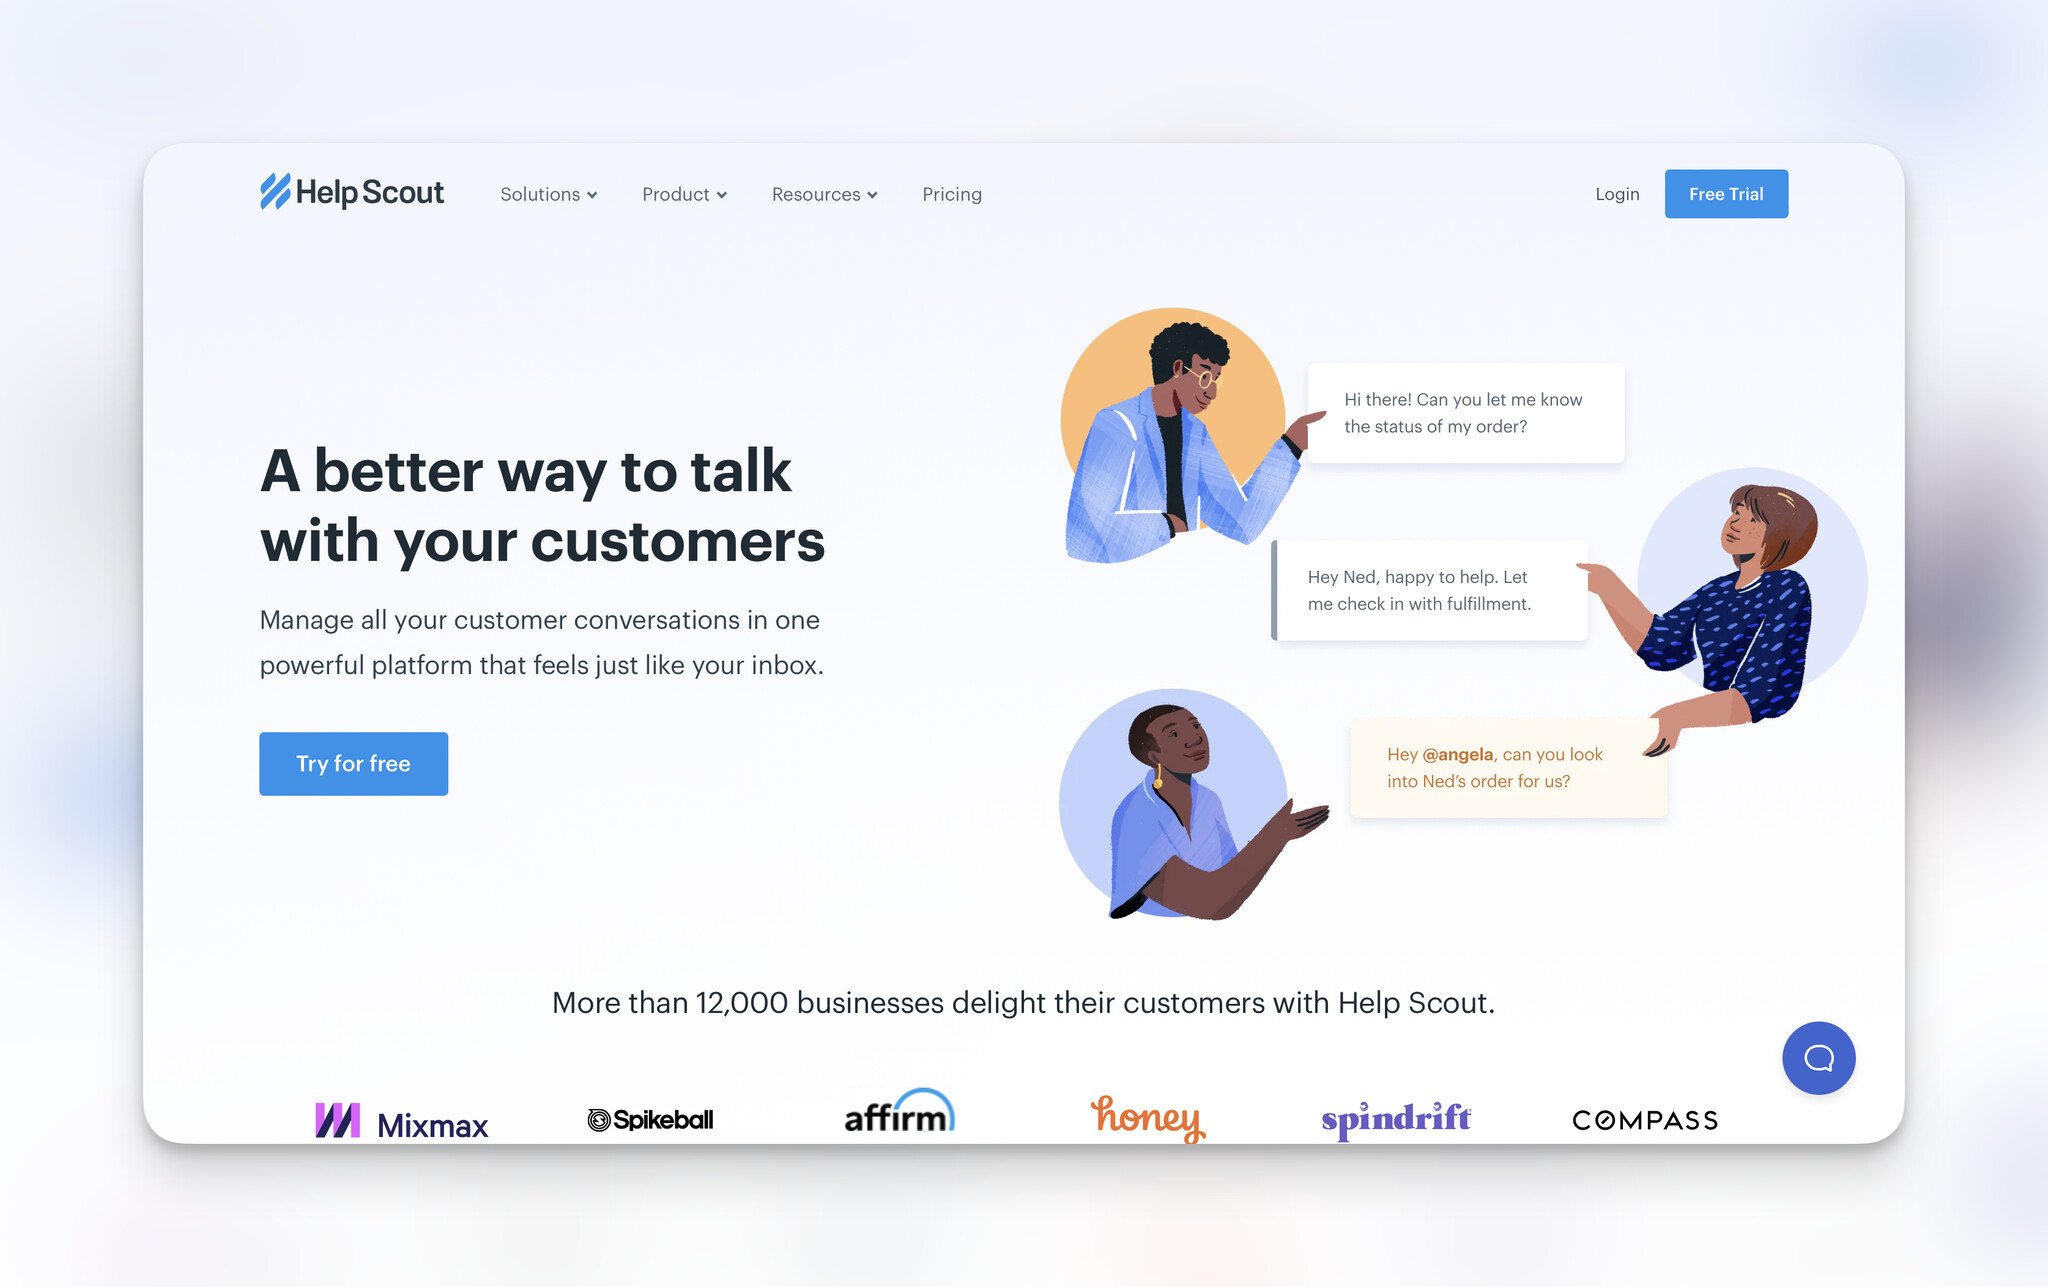 Help Scout's homepage with the headline "A better way to talk with your customers" followed by a blue "Try for free" button and on the right, there are three illustration of people handing chat bubbles to each other